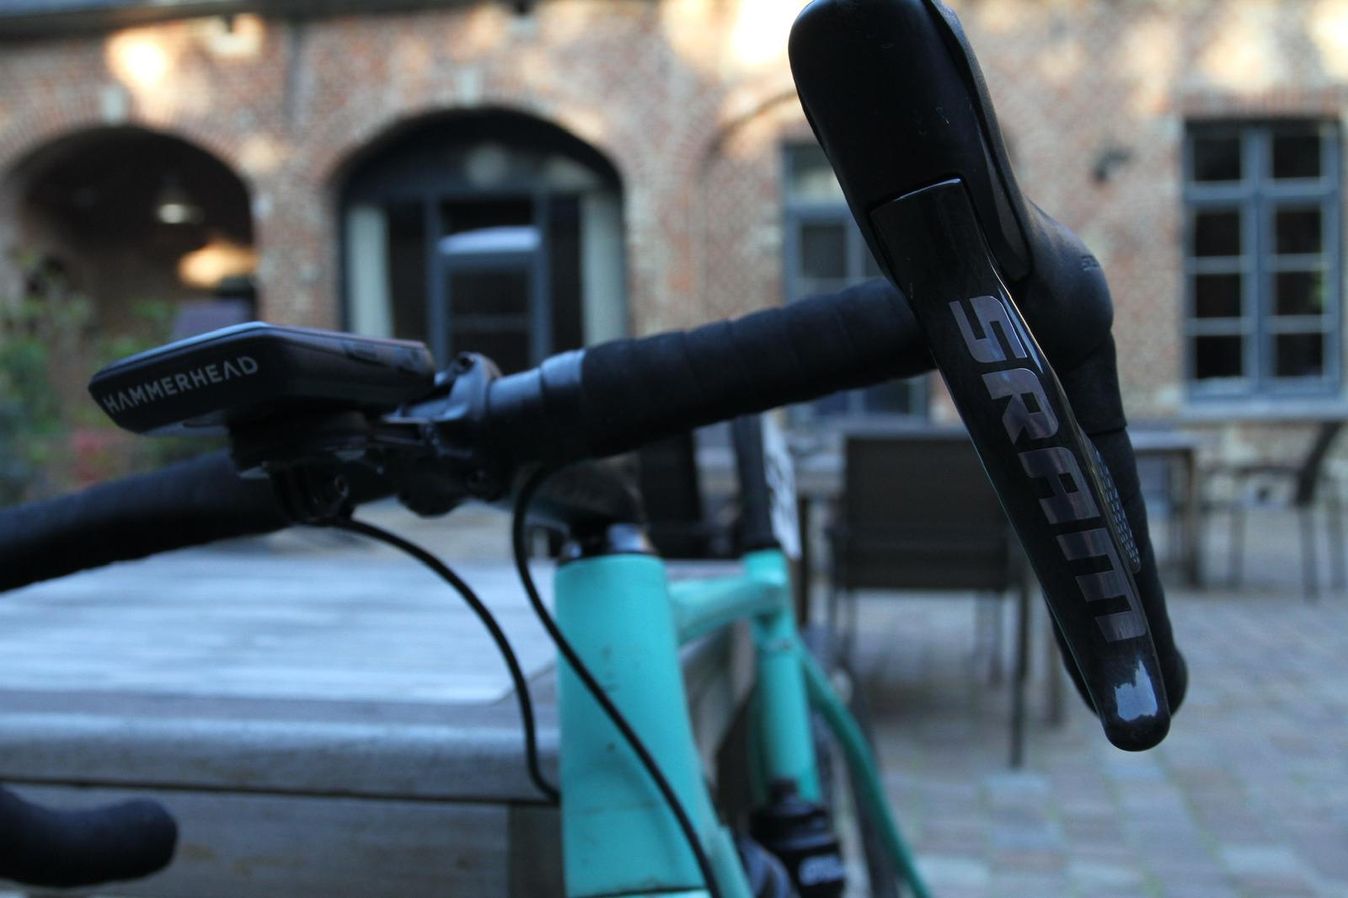 The SRAM-owned company Hammerhead finish off the bike with the Karoo 2.0 head unit 